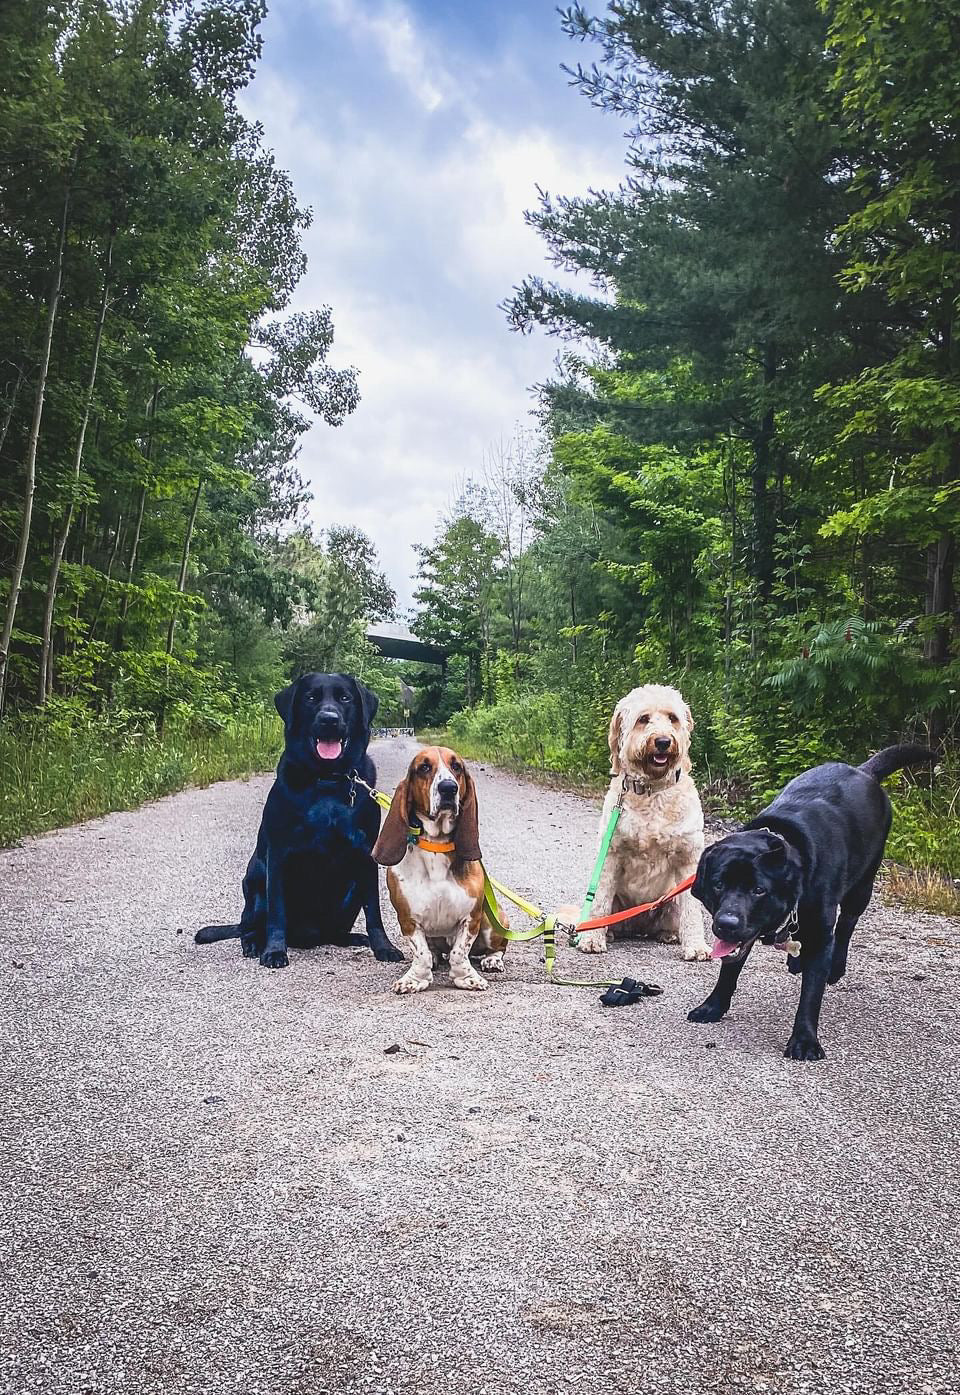 Four dogs are leashed together on a gravel path in a forest. There is two black labs, a basse hound and one goldendoodle. The folliage is green indicating that it's summer time.